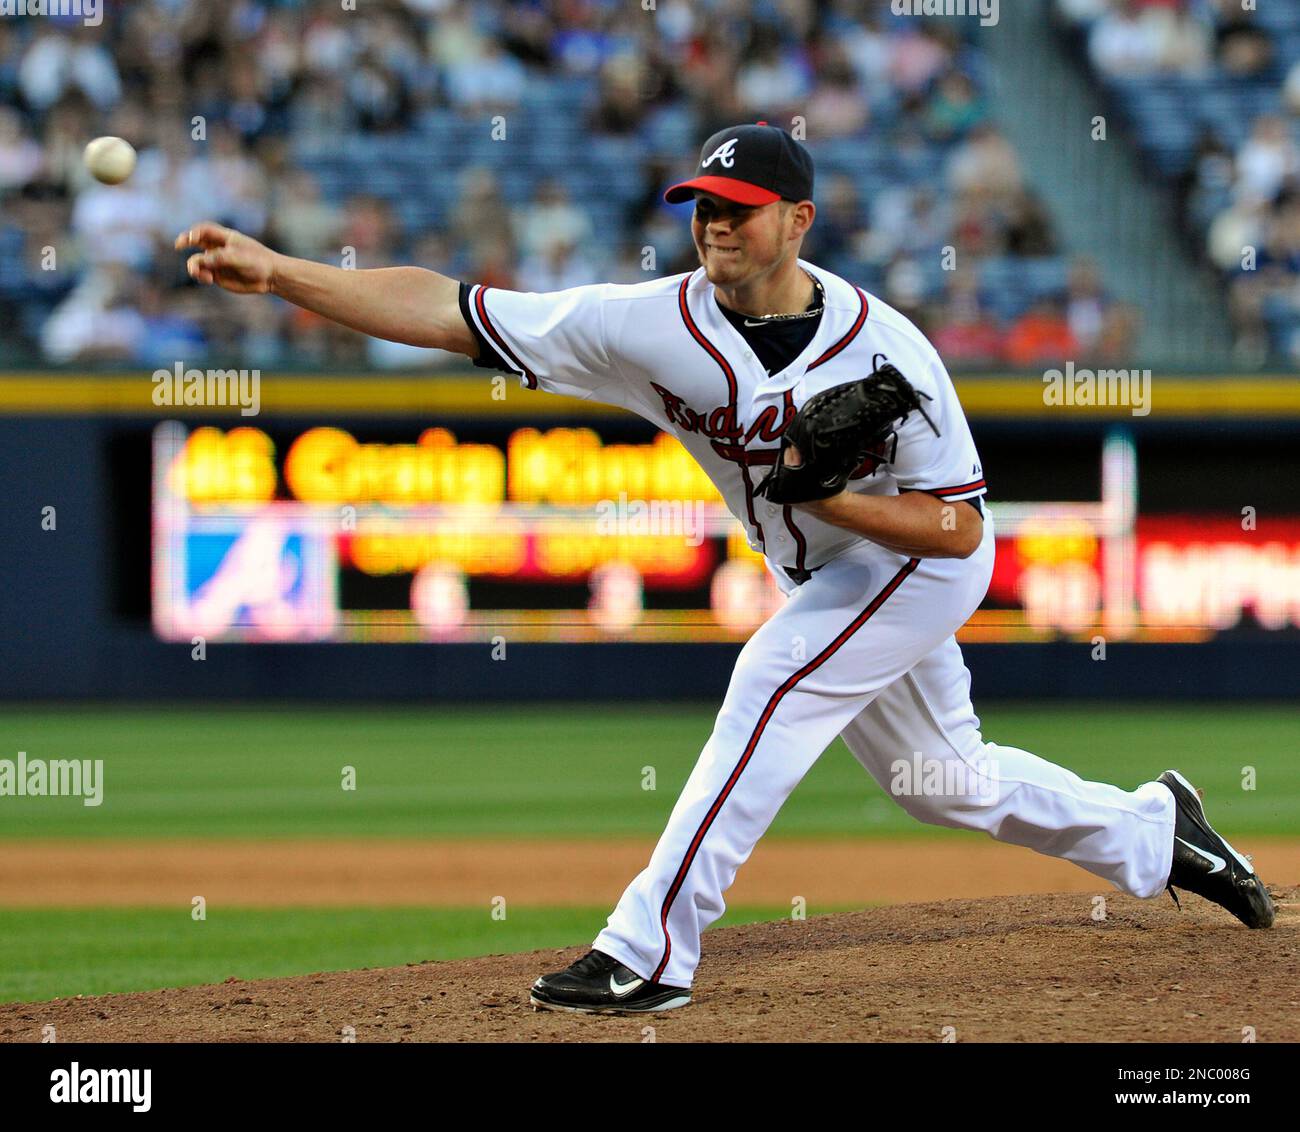 Atlanta Braves closer Craig Kimbrel delivers to the New York Mets during  the ninth inning, in the first baseball game of a doubleheader Saturday,  April 16, 2011, at Turner Field in Atlanta.